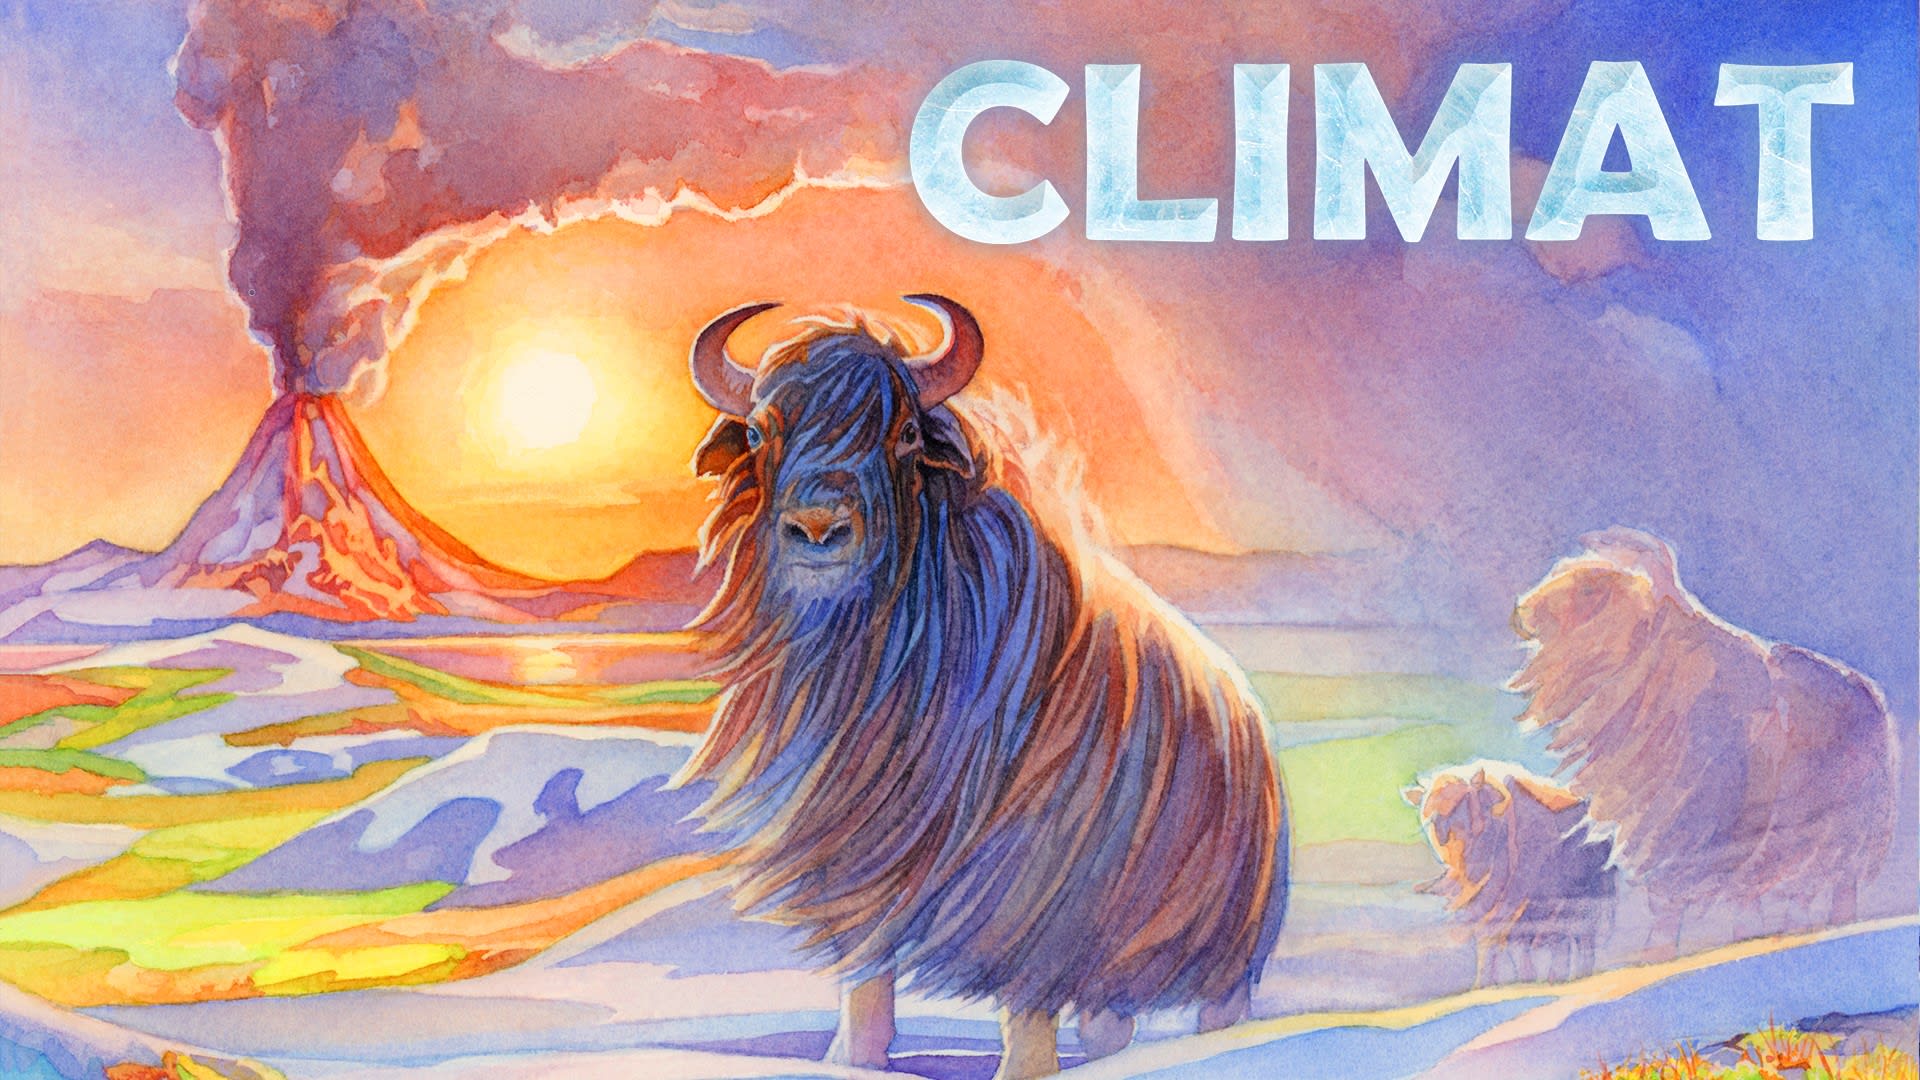 Climate Board Game Expansion